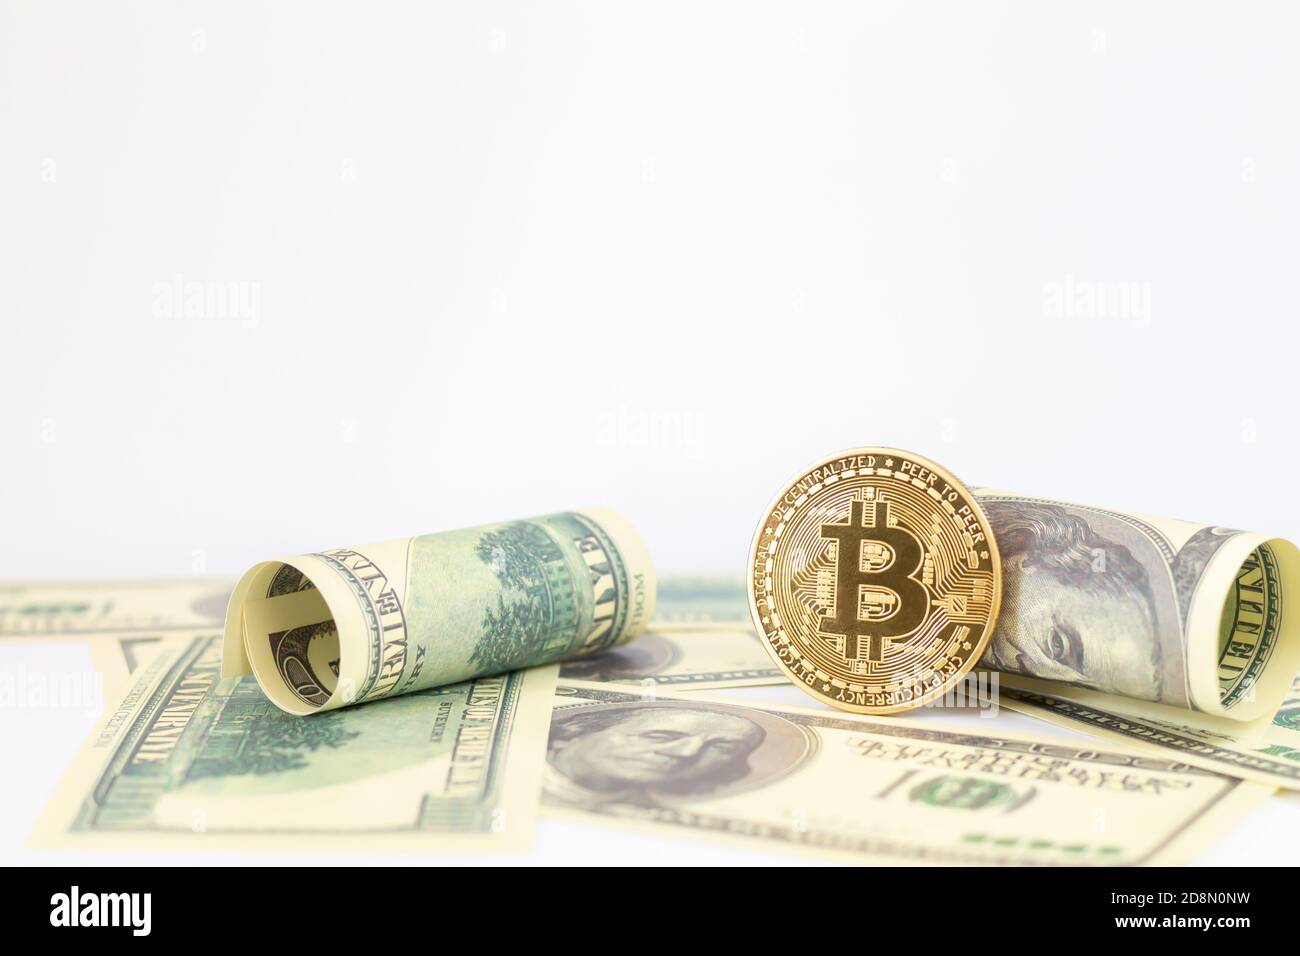 Gold bitcoin and US dollar banknotes isolated on white background Stock Photo